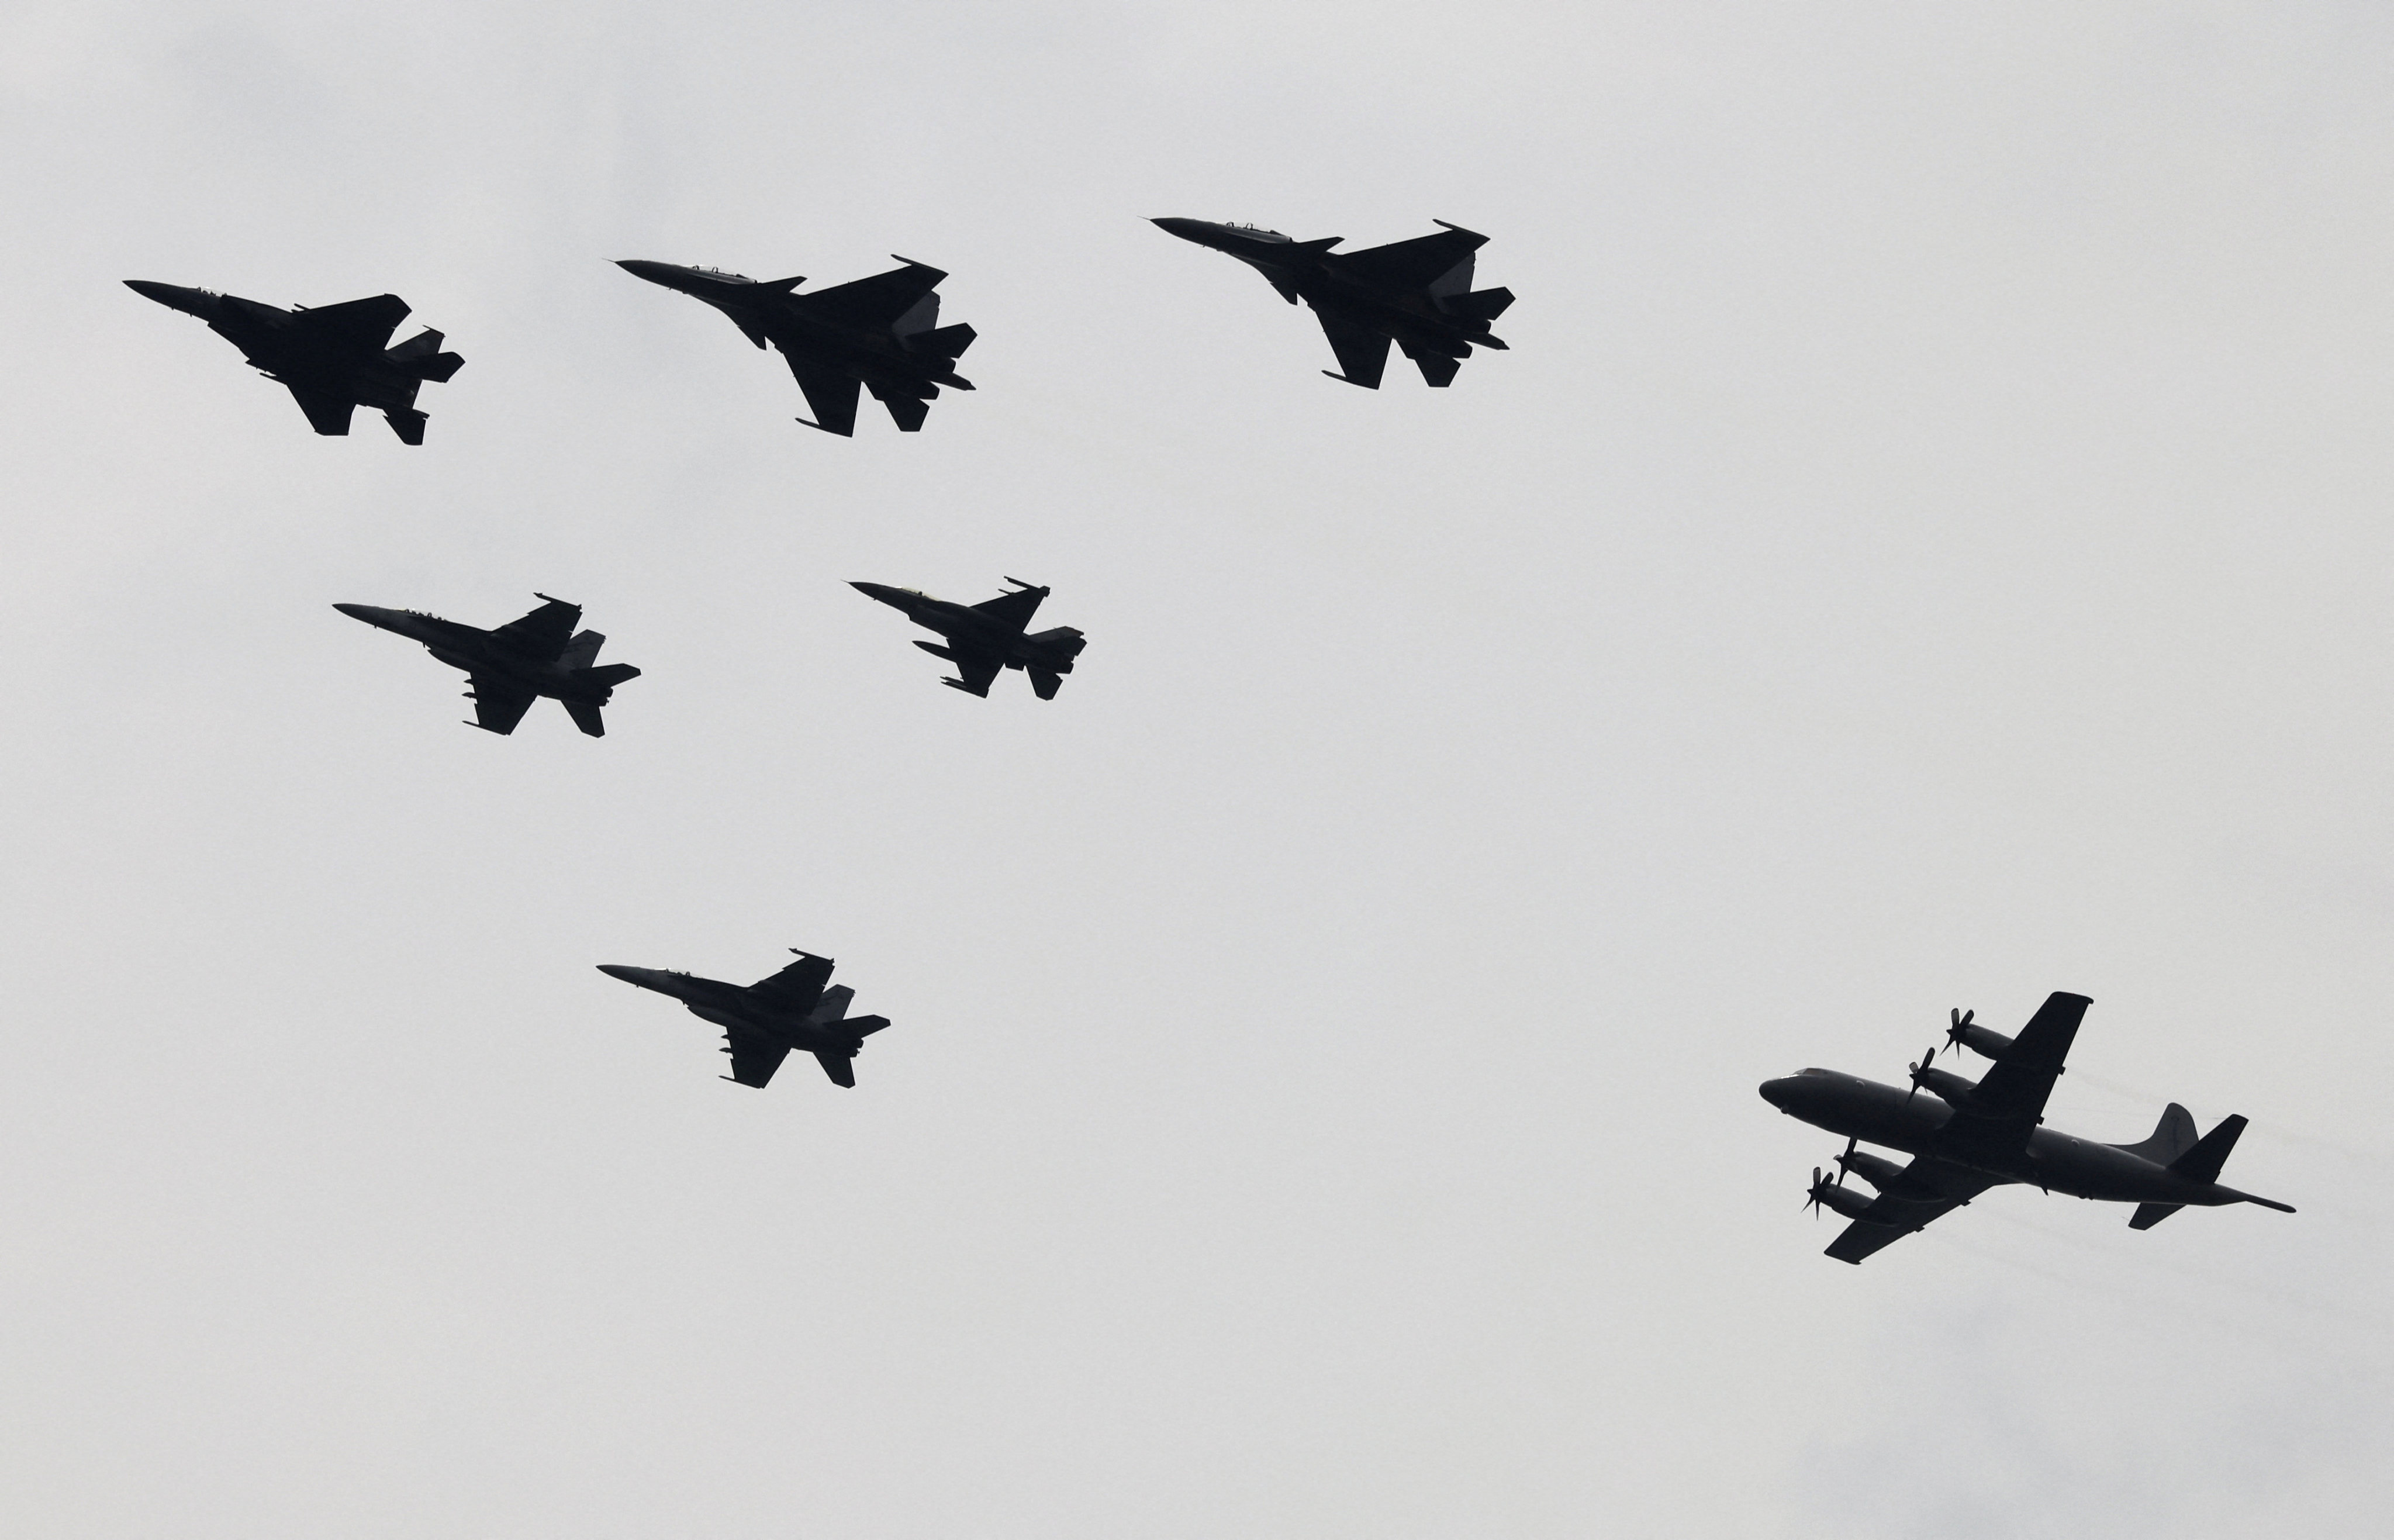 Military aircraft from Malaysia, Singapore, Australia and New Zealand fly in formation to commemorate the 50th anniversary of the Five Power Defence Arrangements in 2021. Photo: Reuters